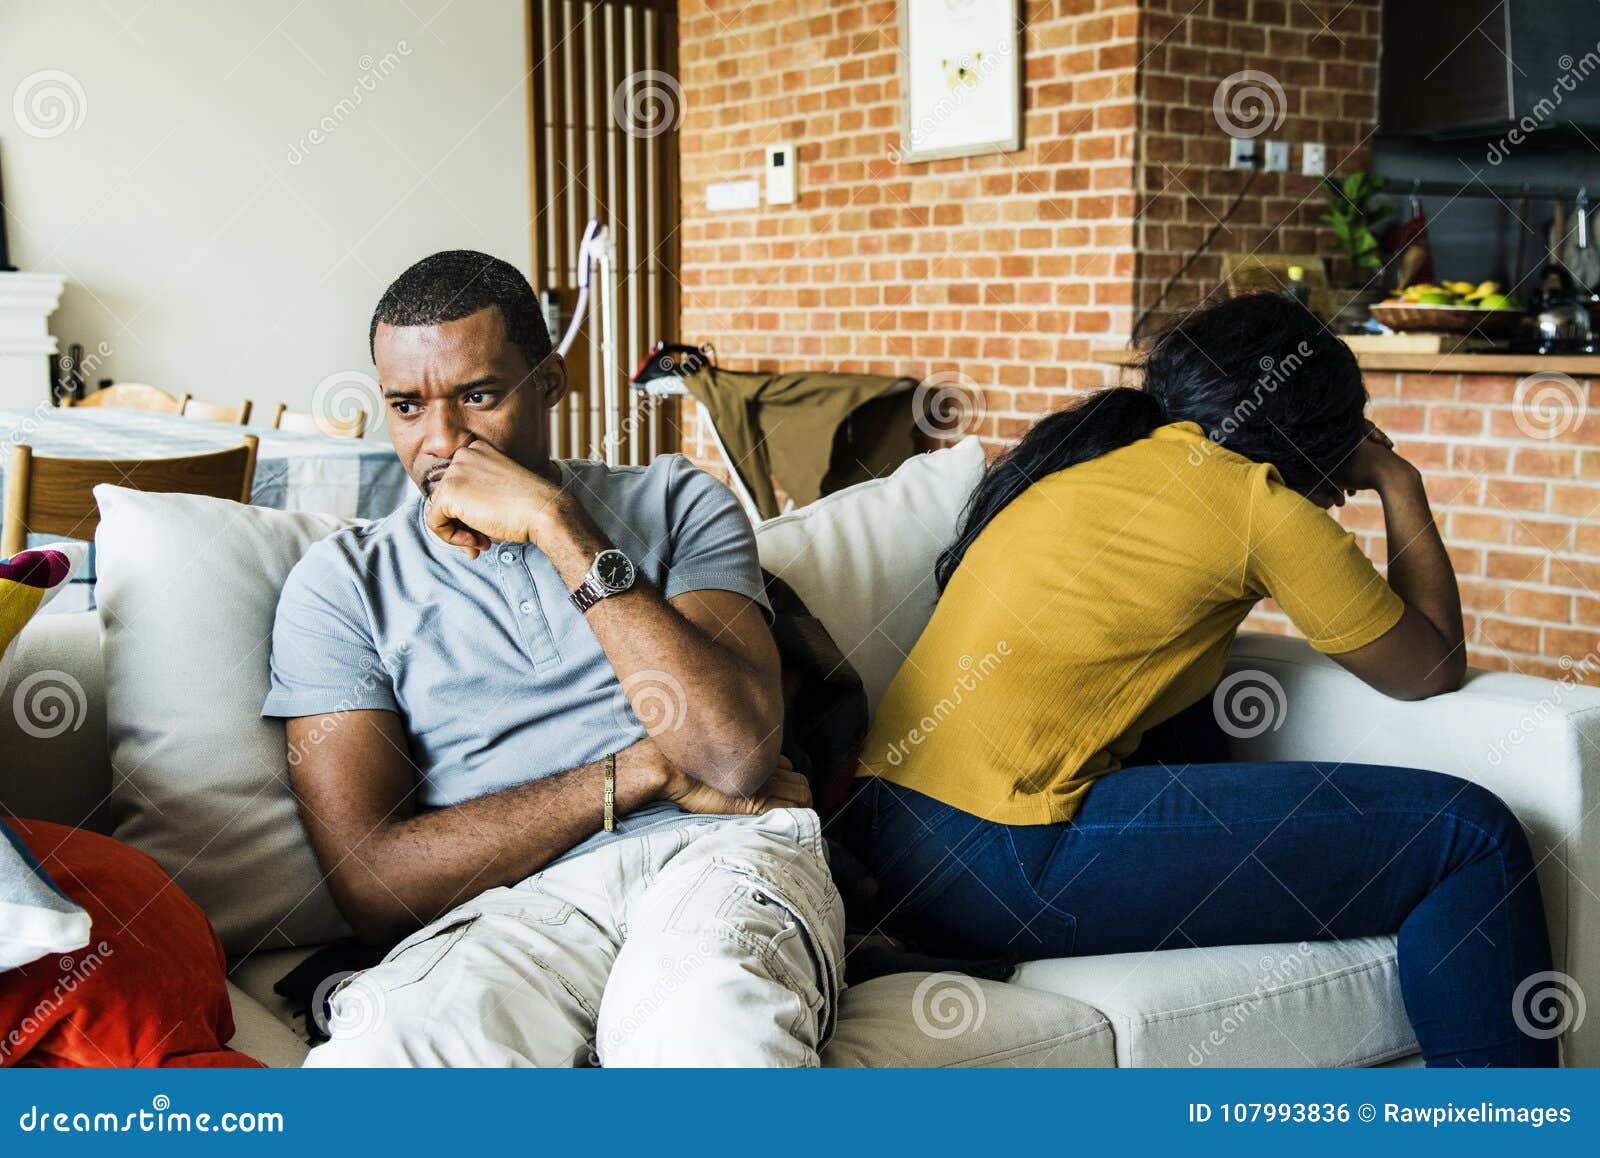 black couple fighting and depressed